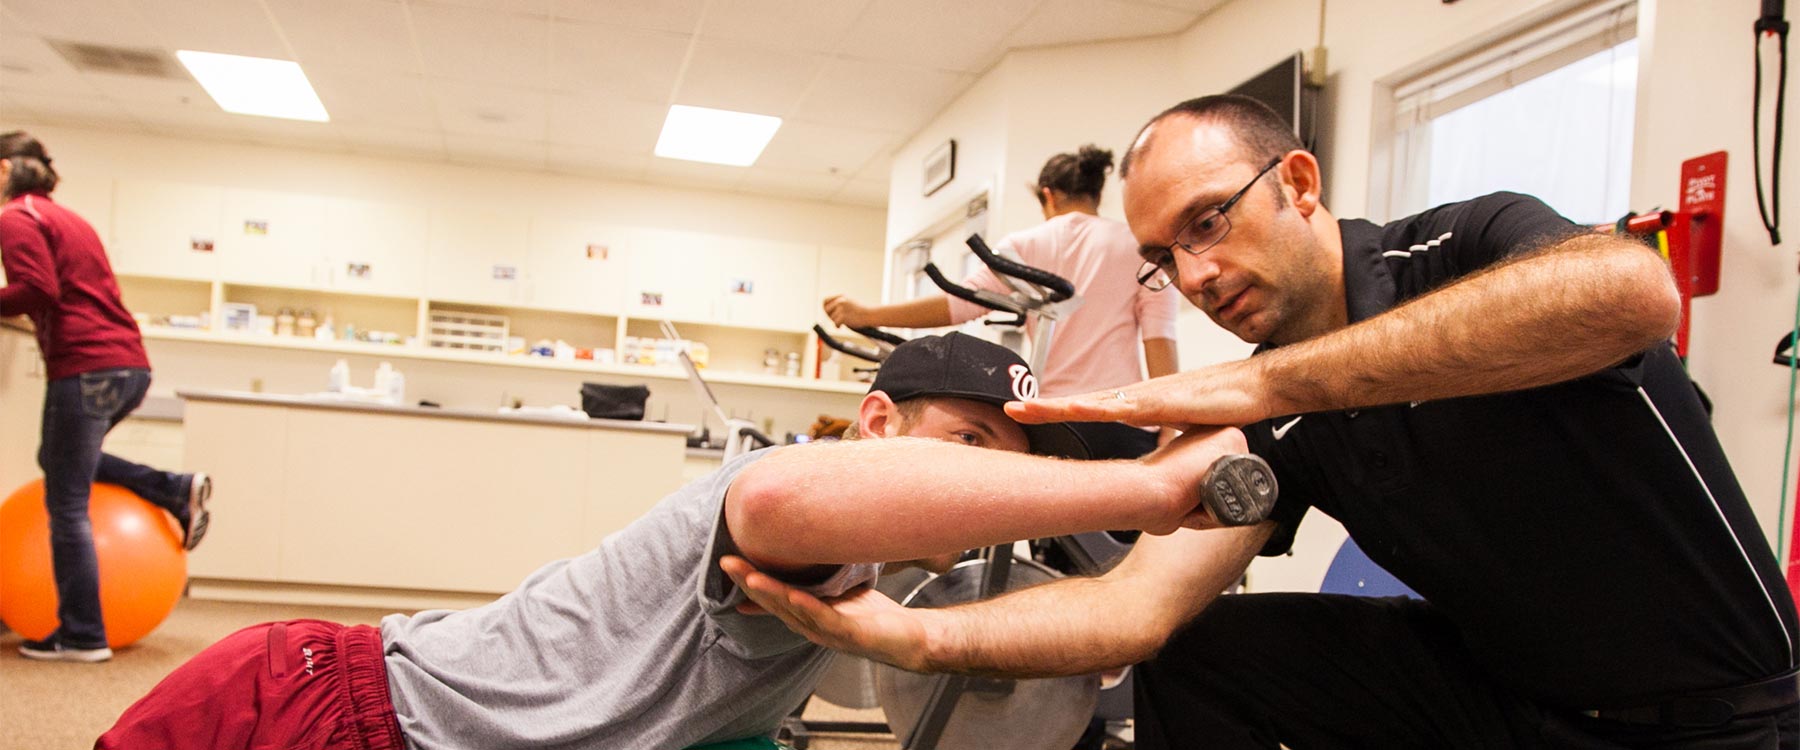 A professor helps an athletic training student with alignment as he lifts a dumbbell.